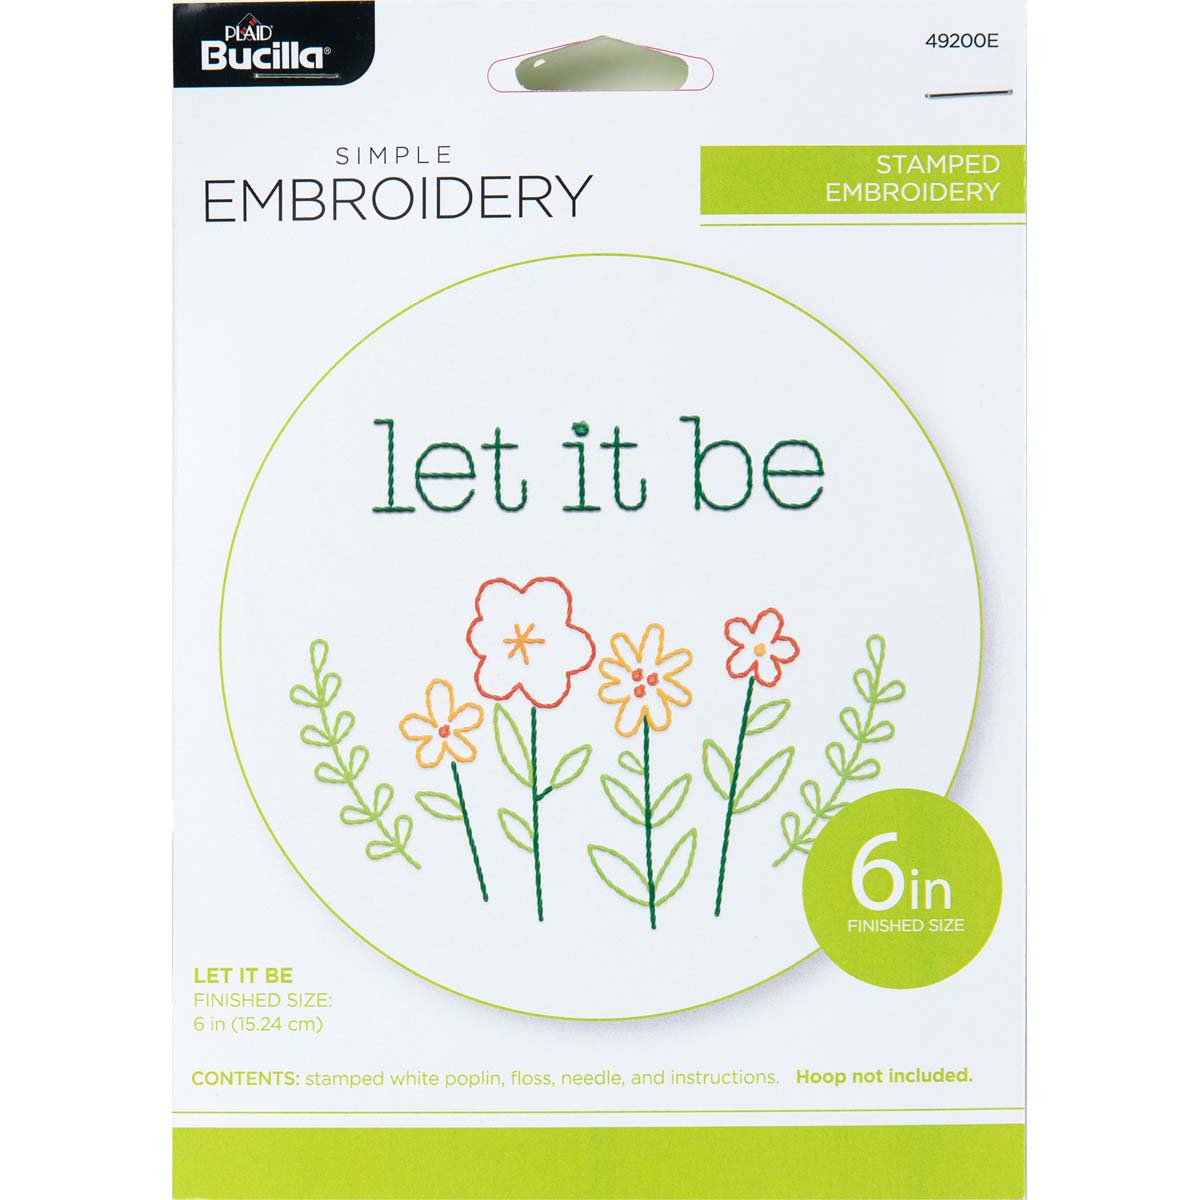 Bucilla ® Stamped Embroidery - Let It Be - 49200E